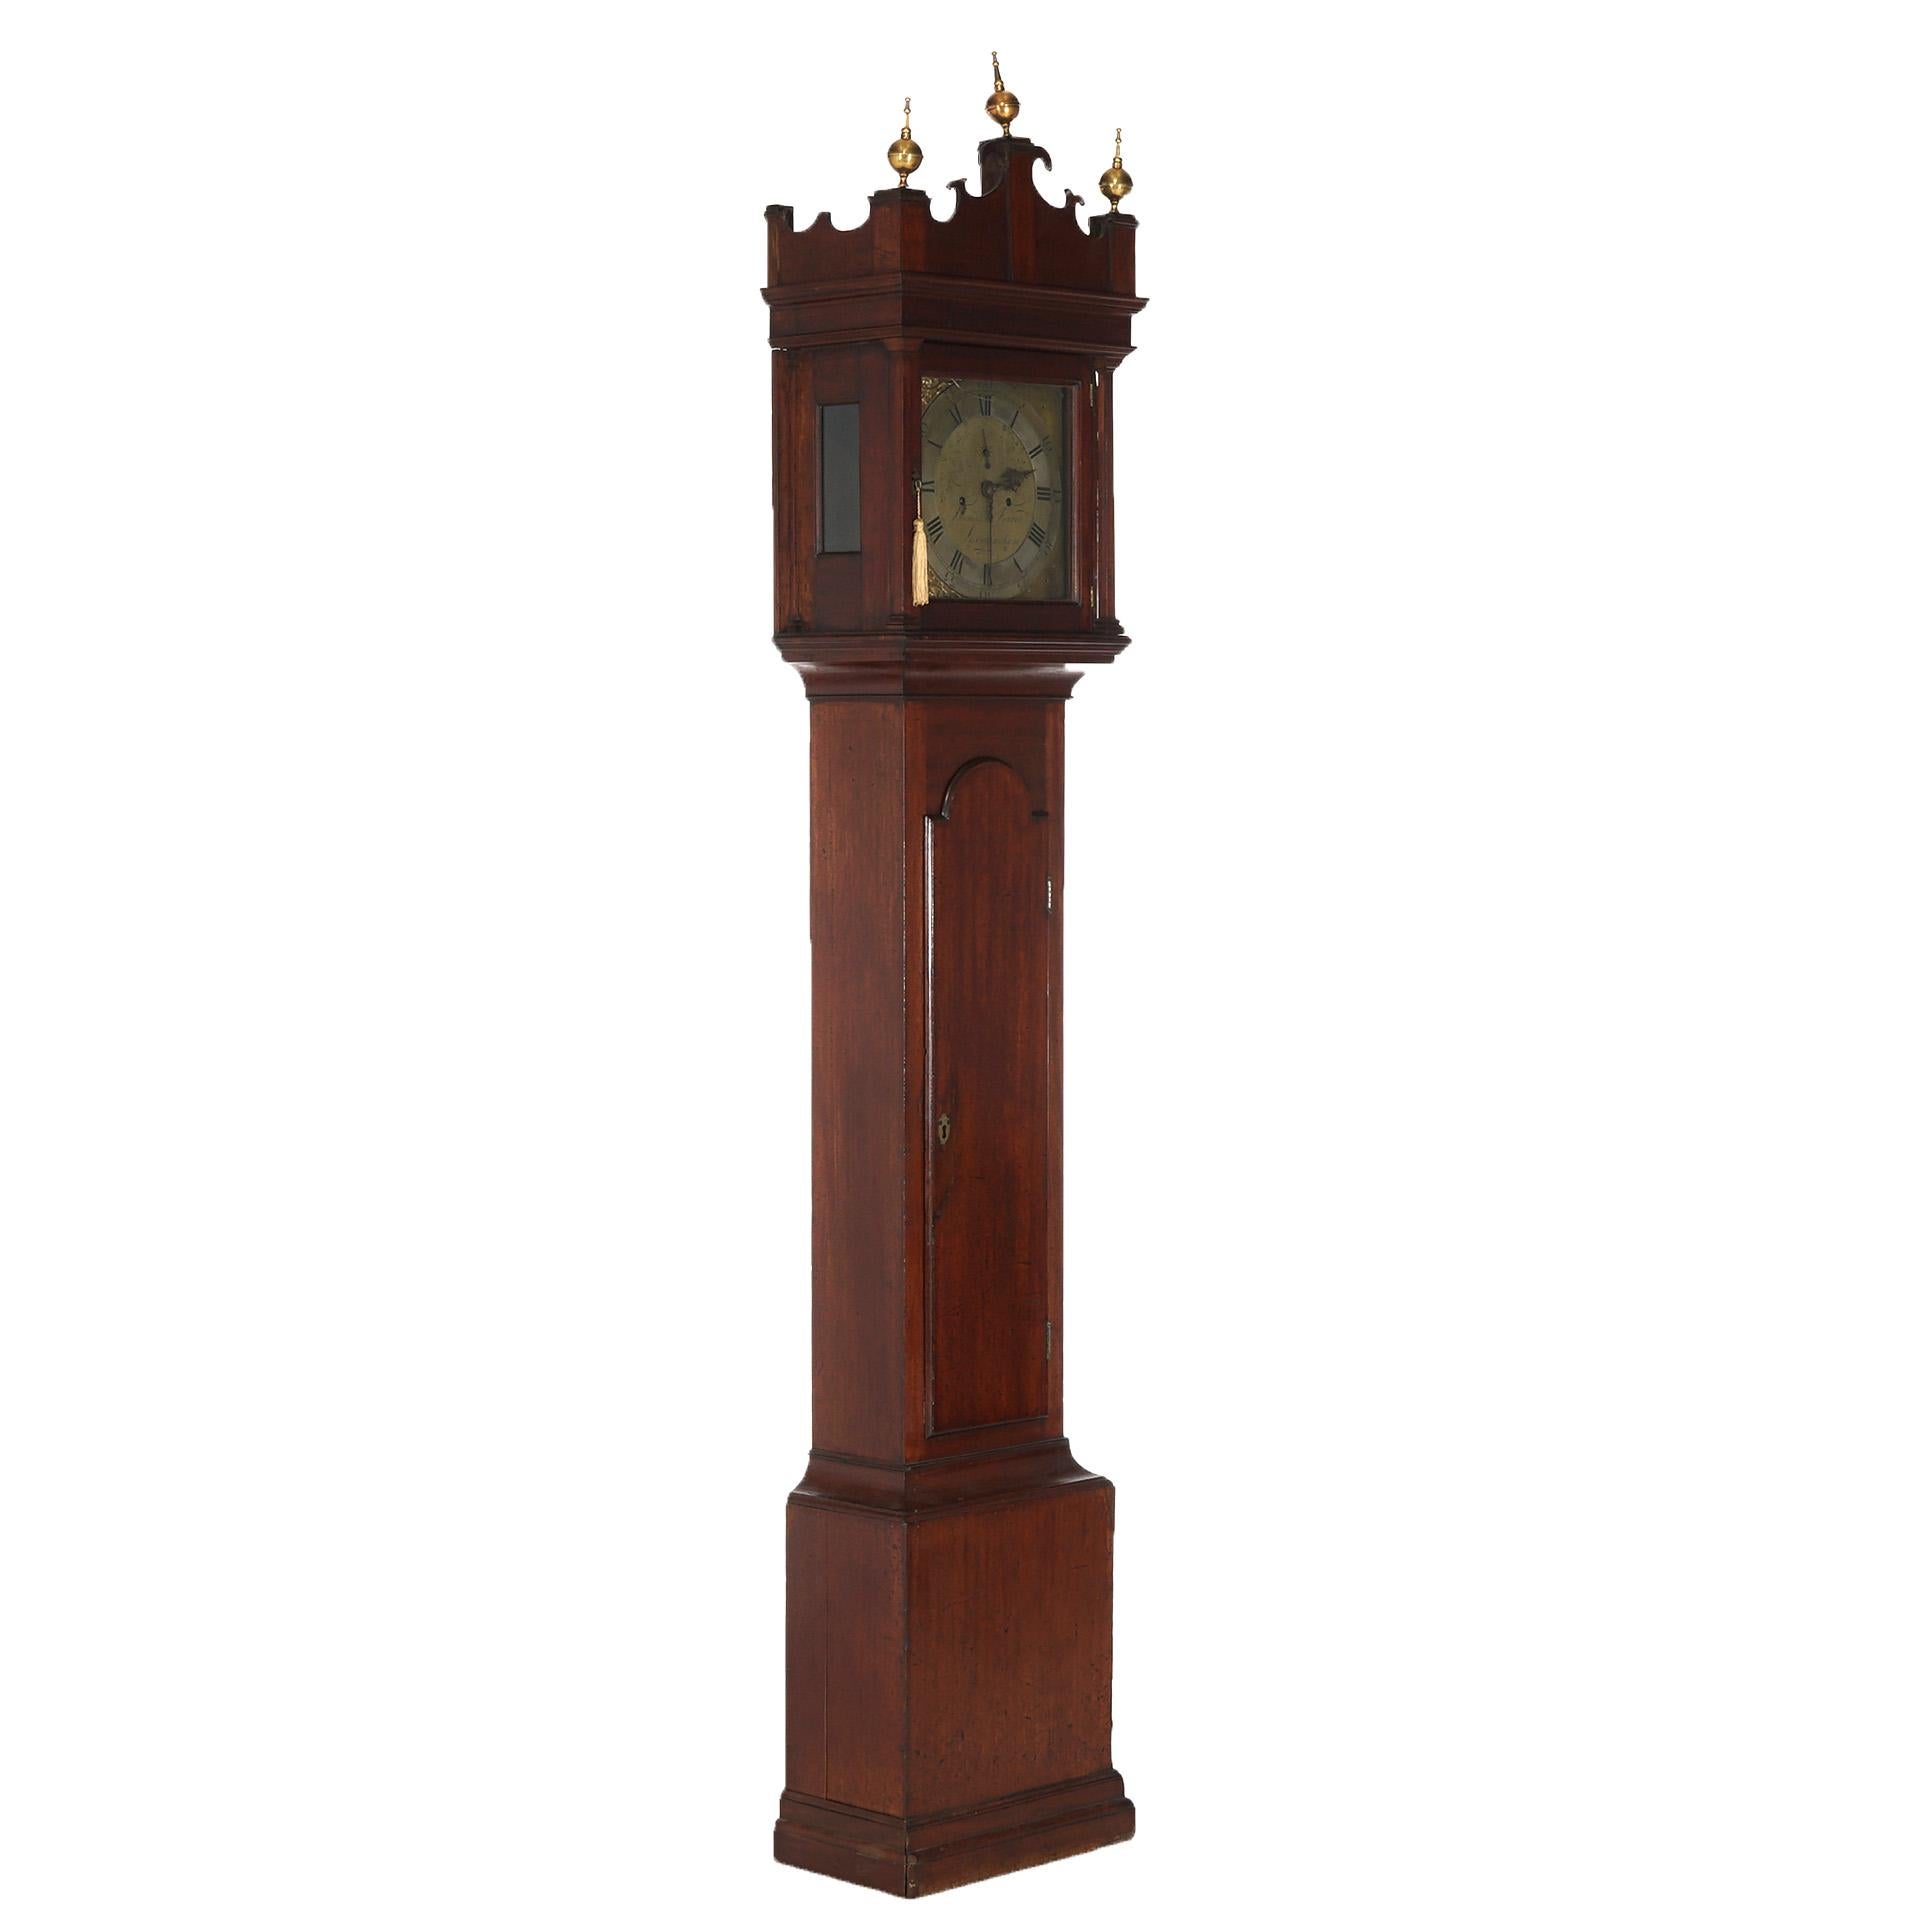 Antique Thomas Farrer Mahogany Grandfather Clock With Brass Finials 19thC For Sale 5